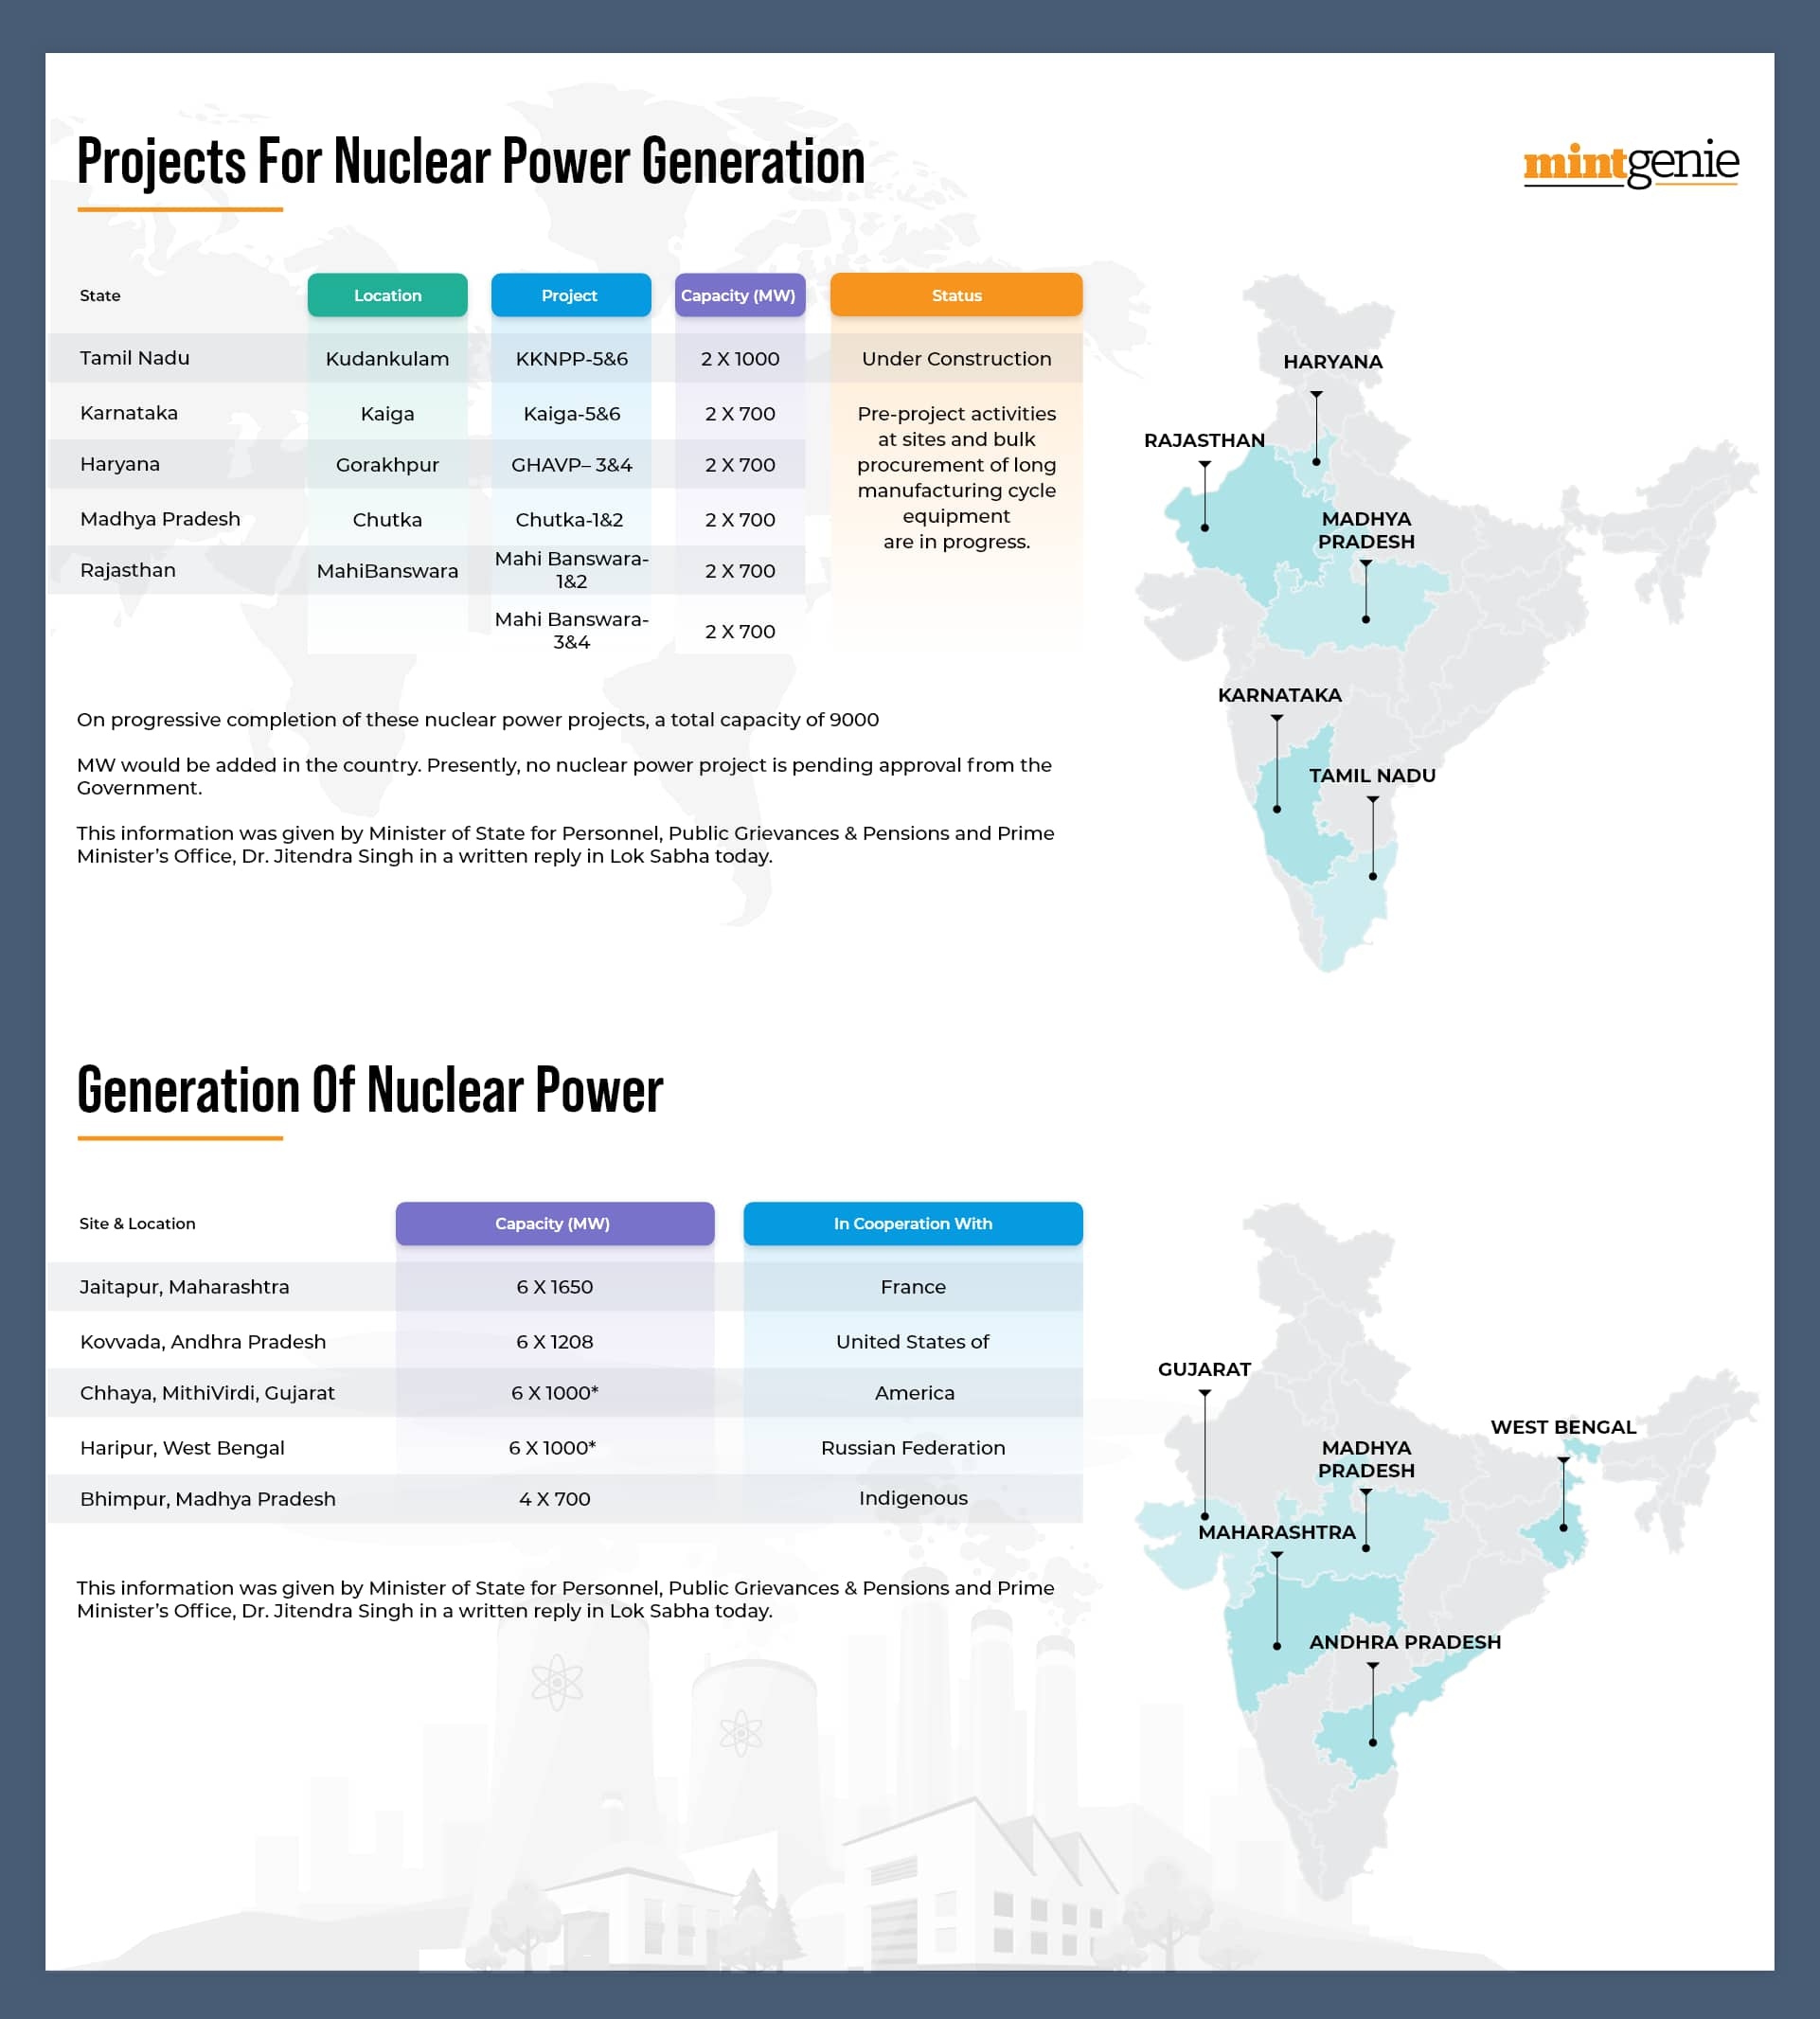 Projection for Nuclear Power Generation